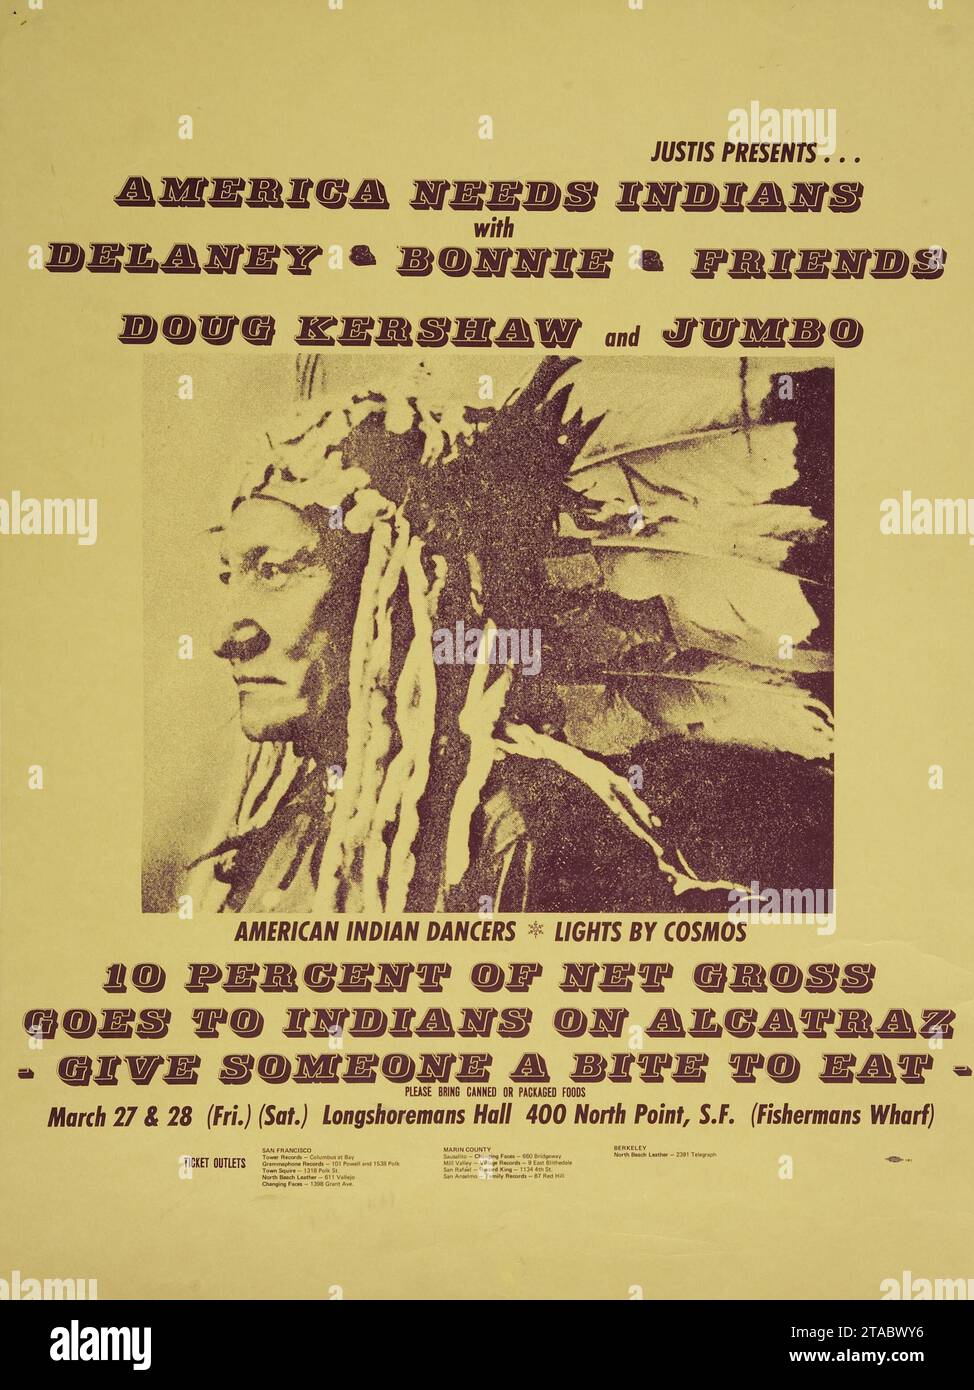 Benefint concert - Delaney & Bonnie America Needs Indians - American Indian Dancers, Old Concert Poster feat a Native American with bonnet Stock Photo